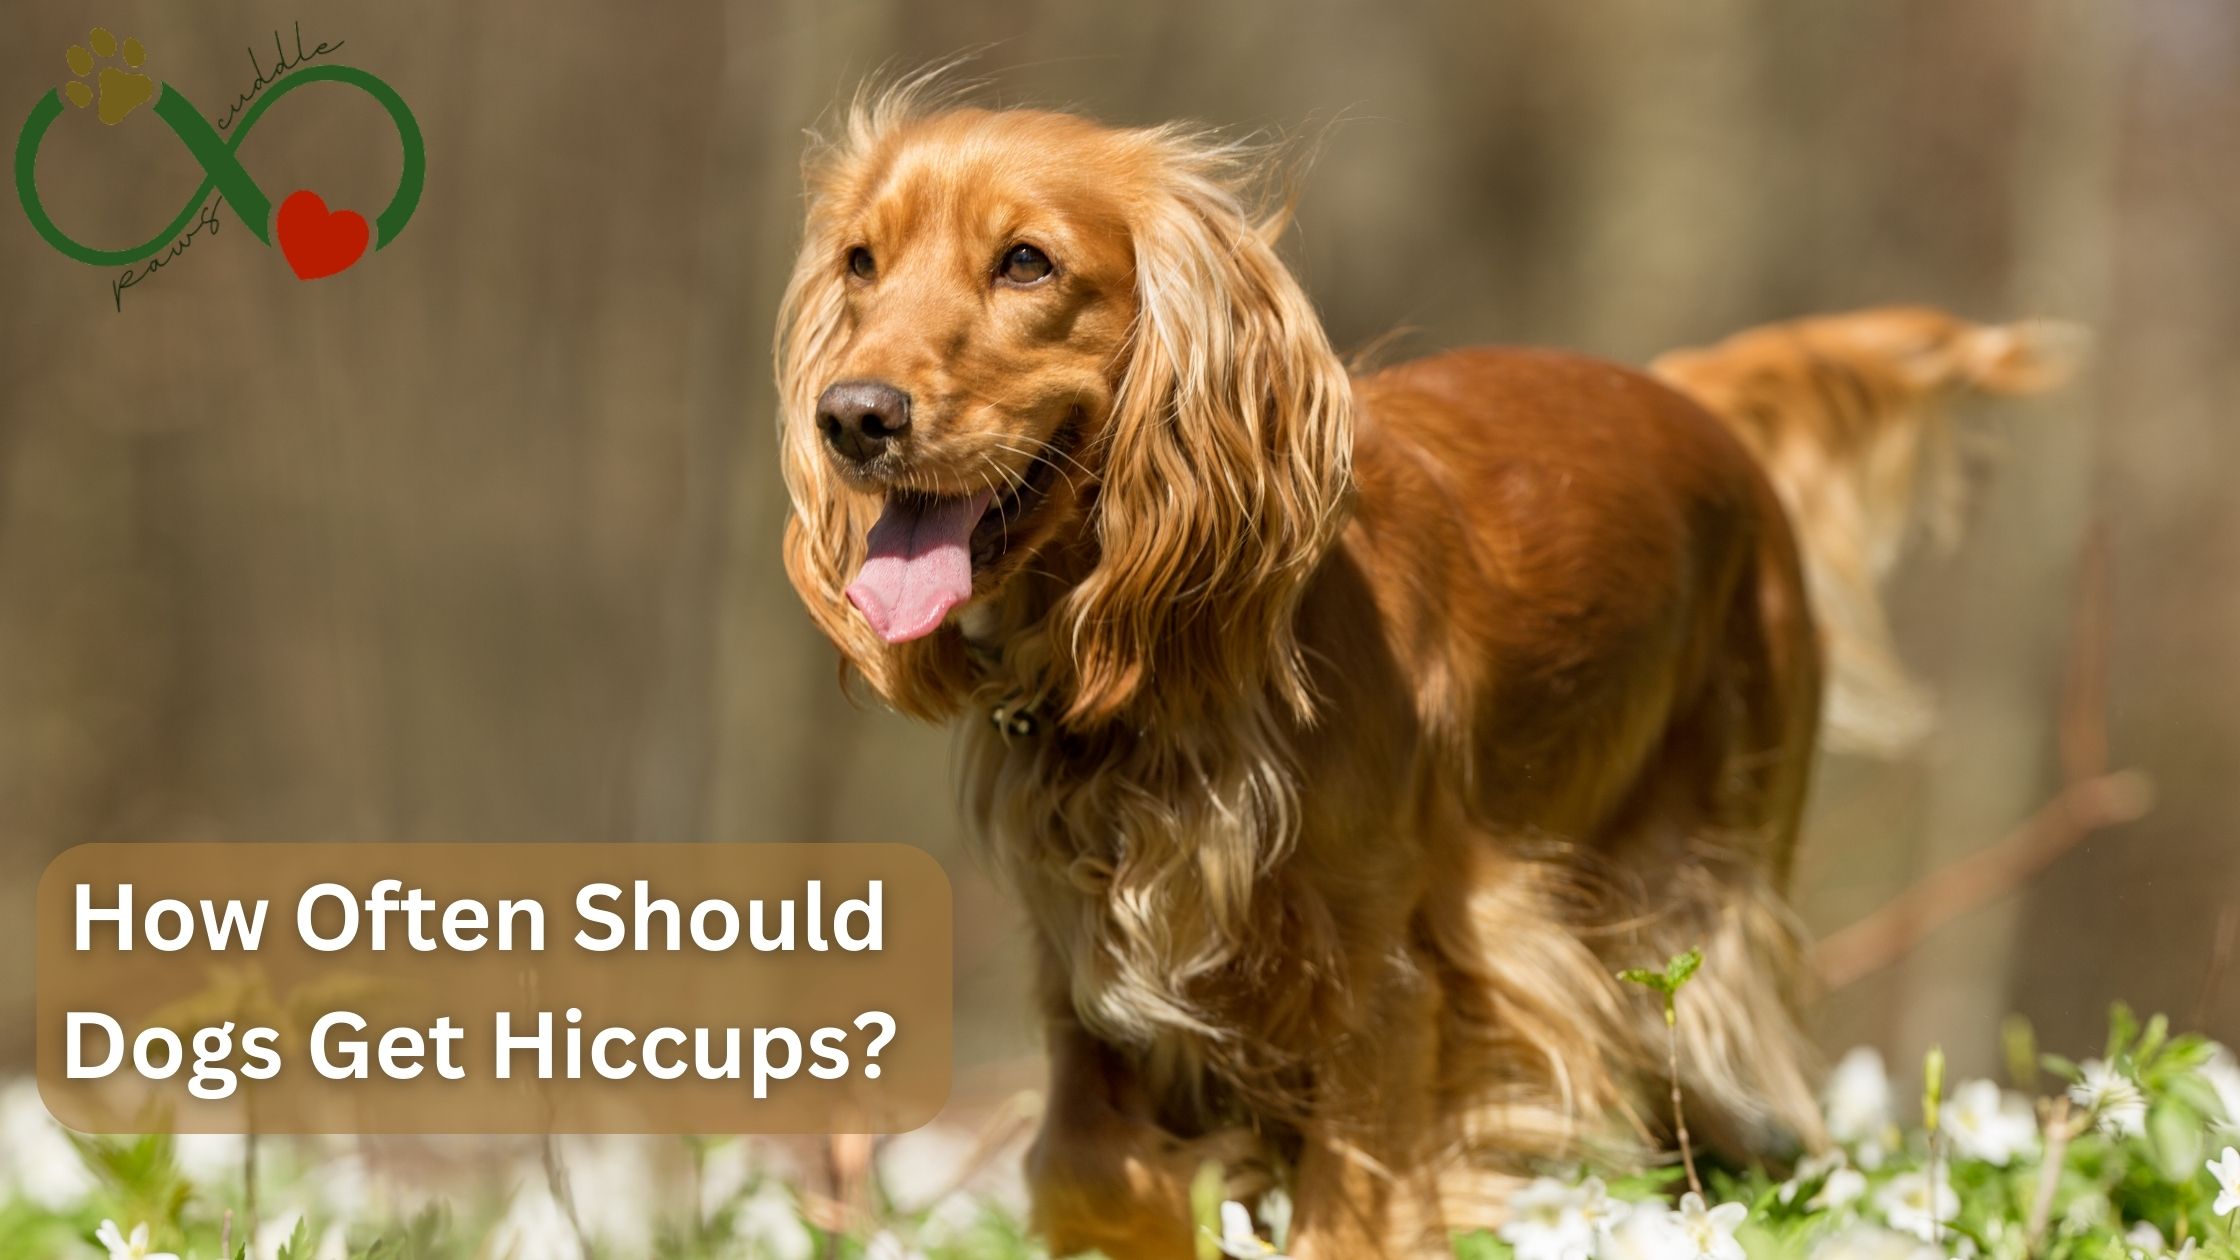 How often should dogs get hiccups?